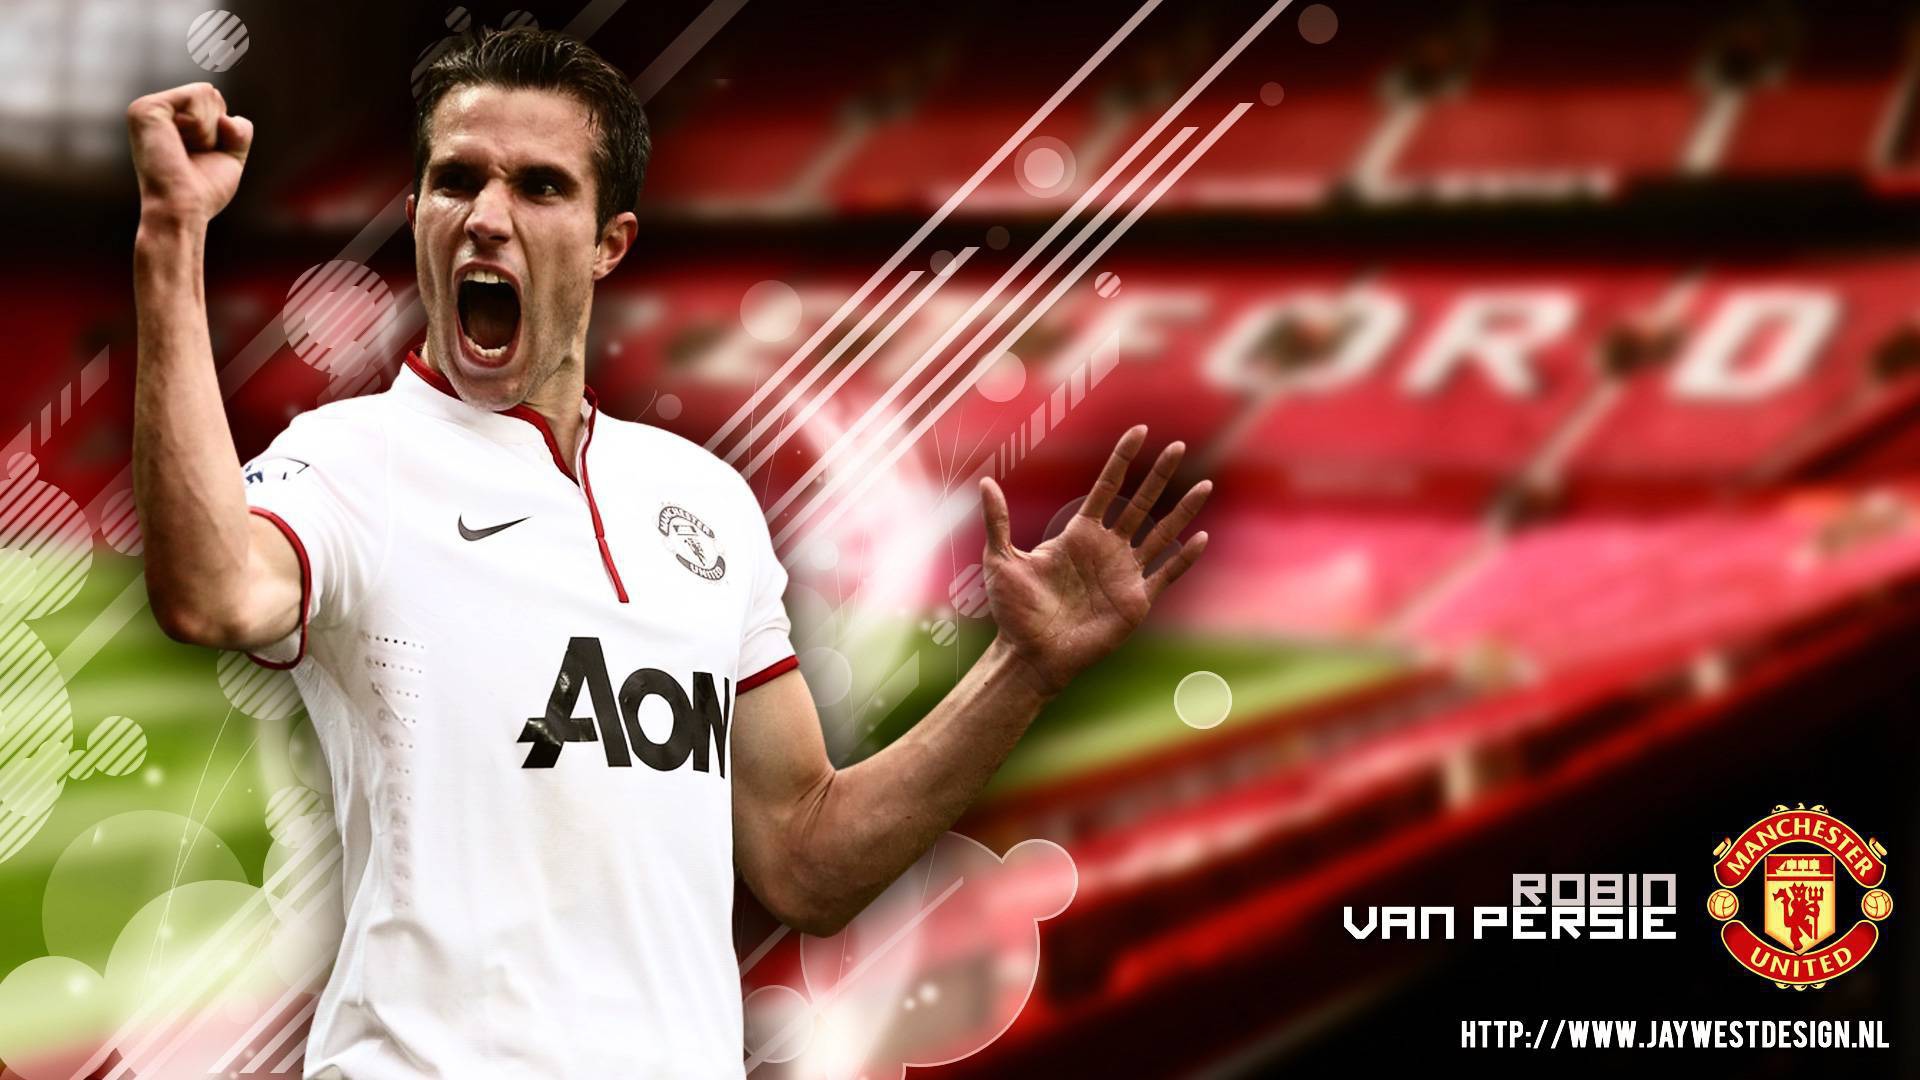 The player of Manchester United Robin van Persie scores